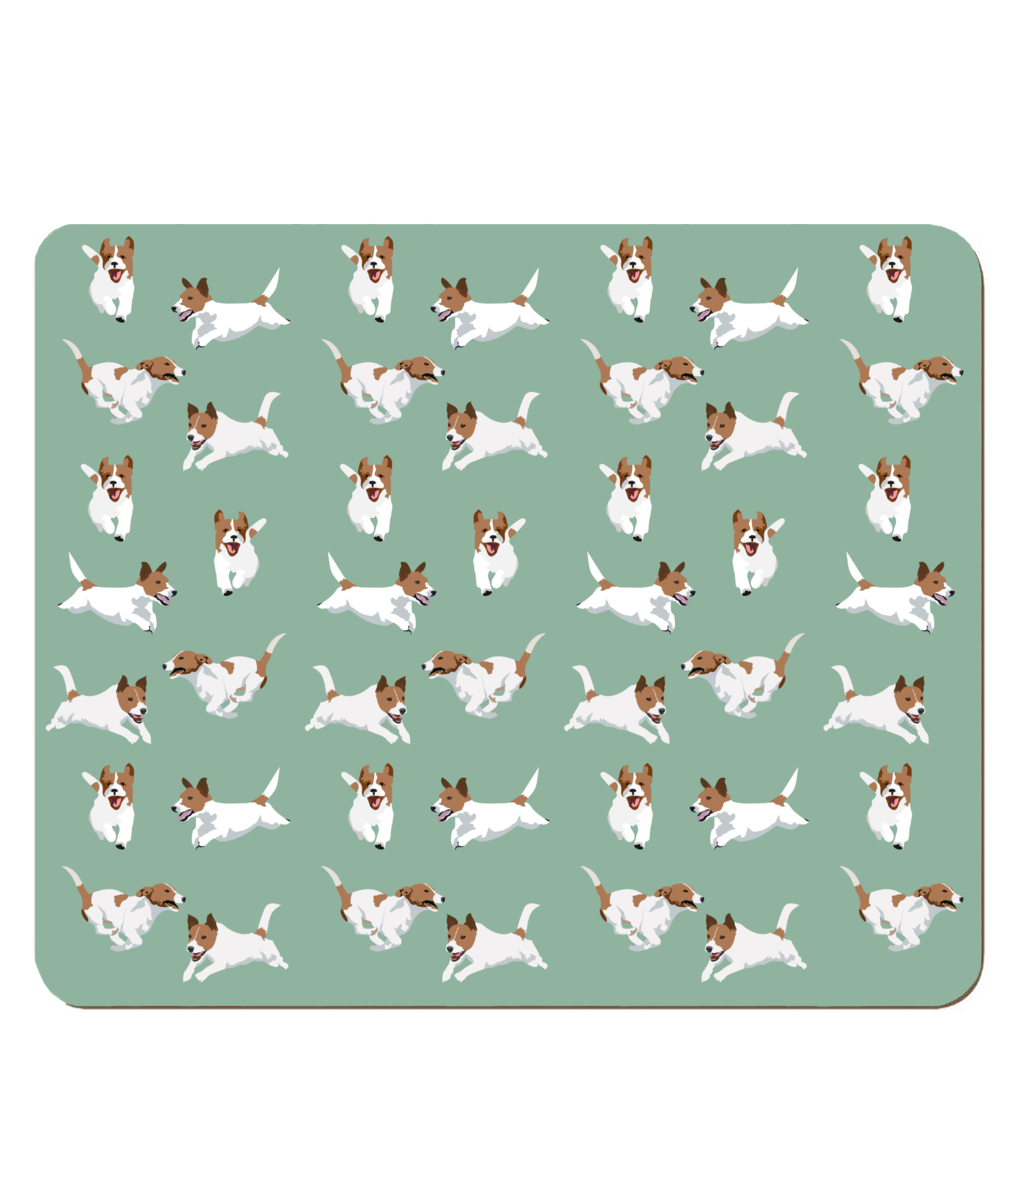 Jack Russell Placemat in Jade Green